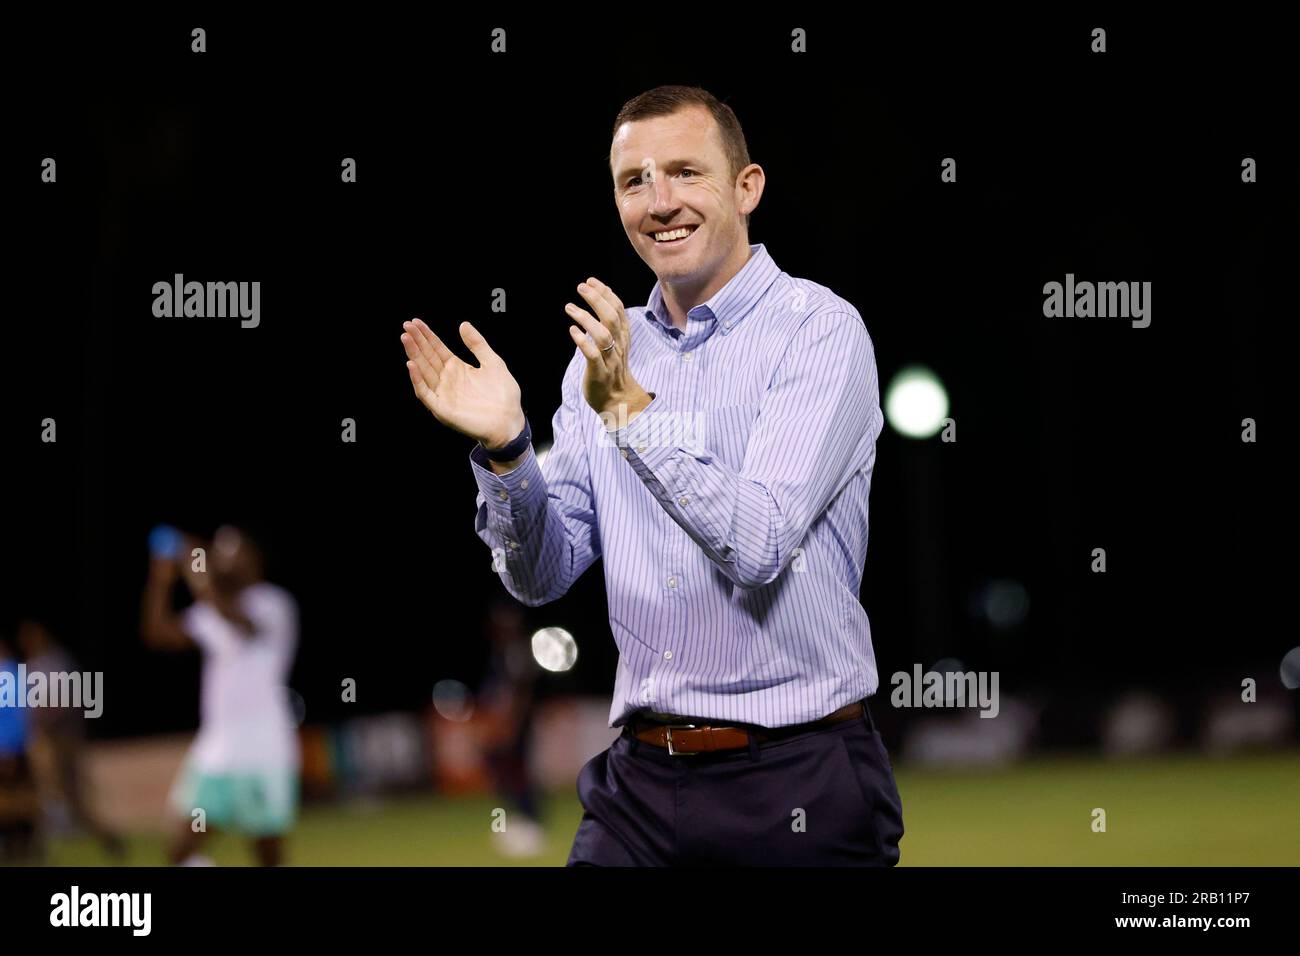 MAY 13, 2023 - ST. PETERSBURG, FLORIDA: Tampa Bay Rowdies Head Coach Neill Collins during the Tampa Bay Rowdies match against Detroit City FC at Al Lang Stadium. Collins was named the Head Coach at Barnsley F.C. on July 6, 2023. Stock Photo